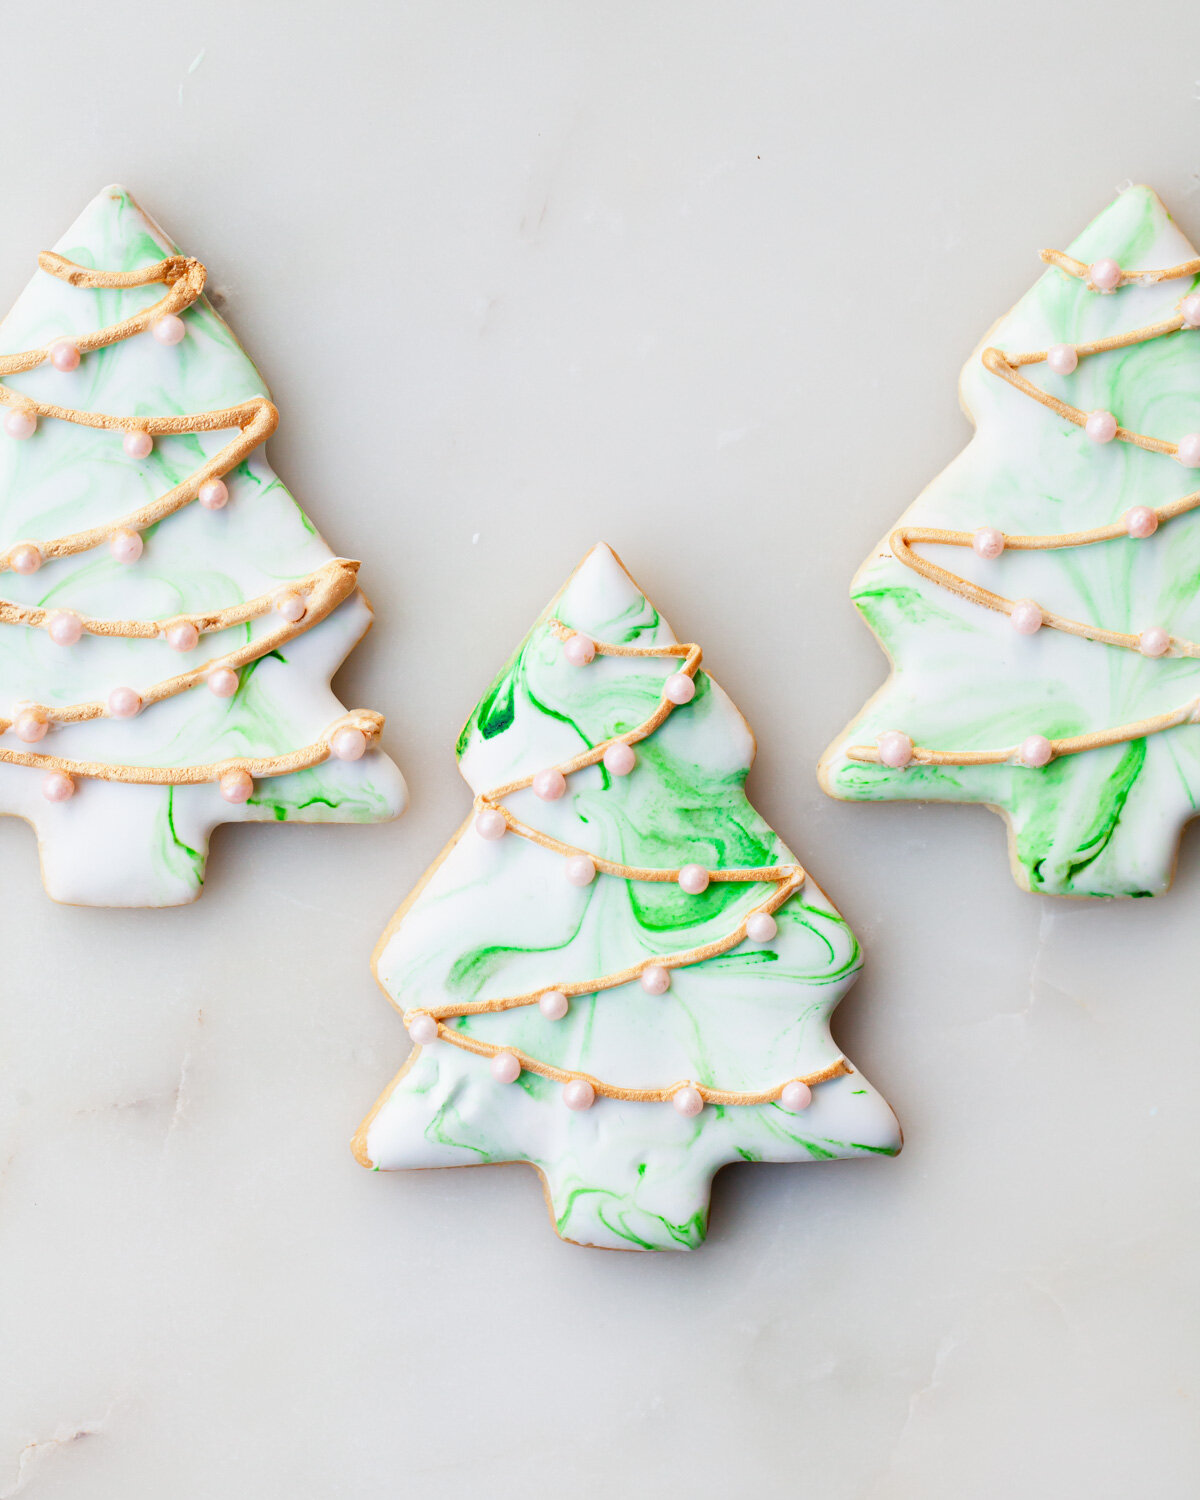 How to make marbled sugar cookies